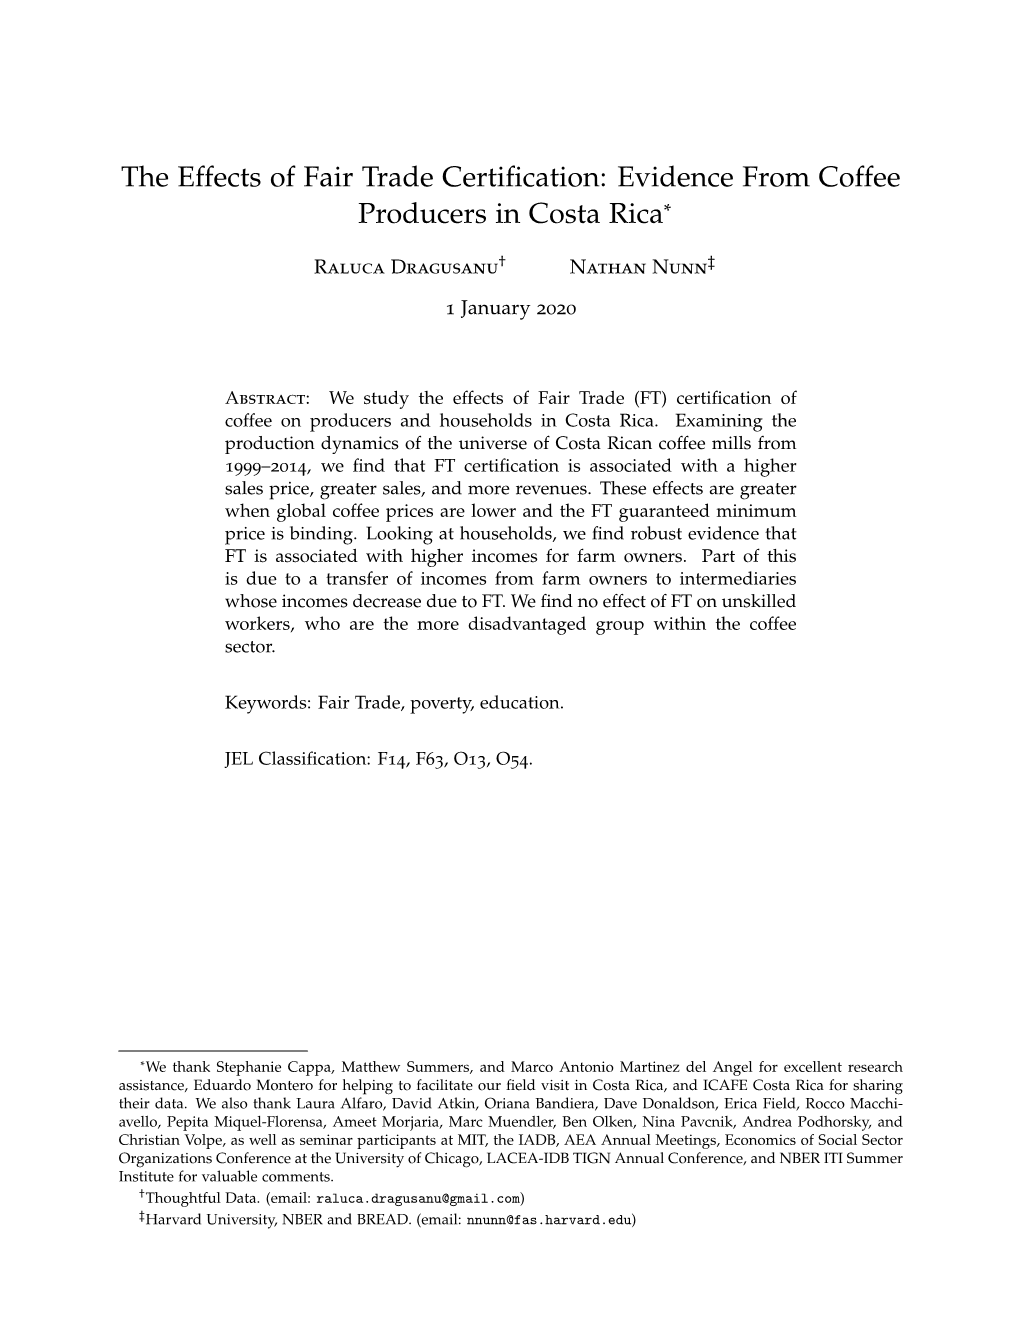 The Effects of Fair Trade Certification: Evidence from Coffee Producers In